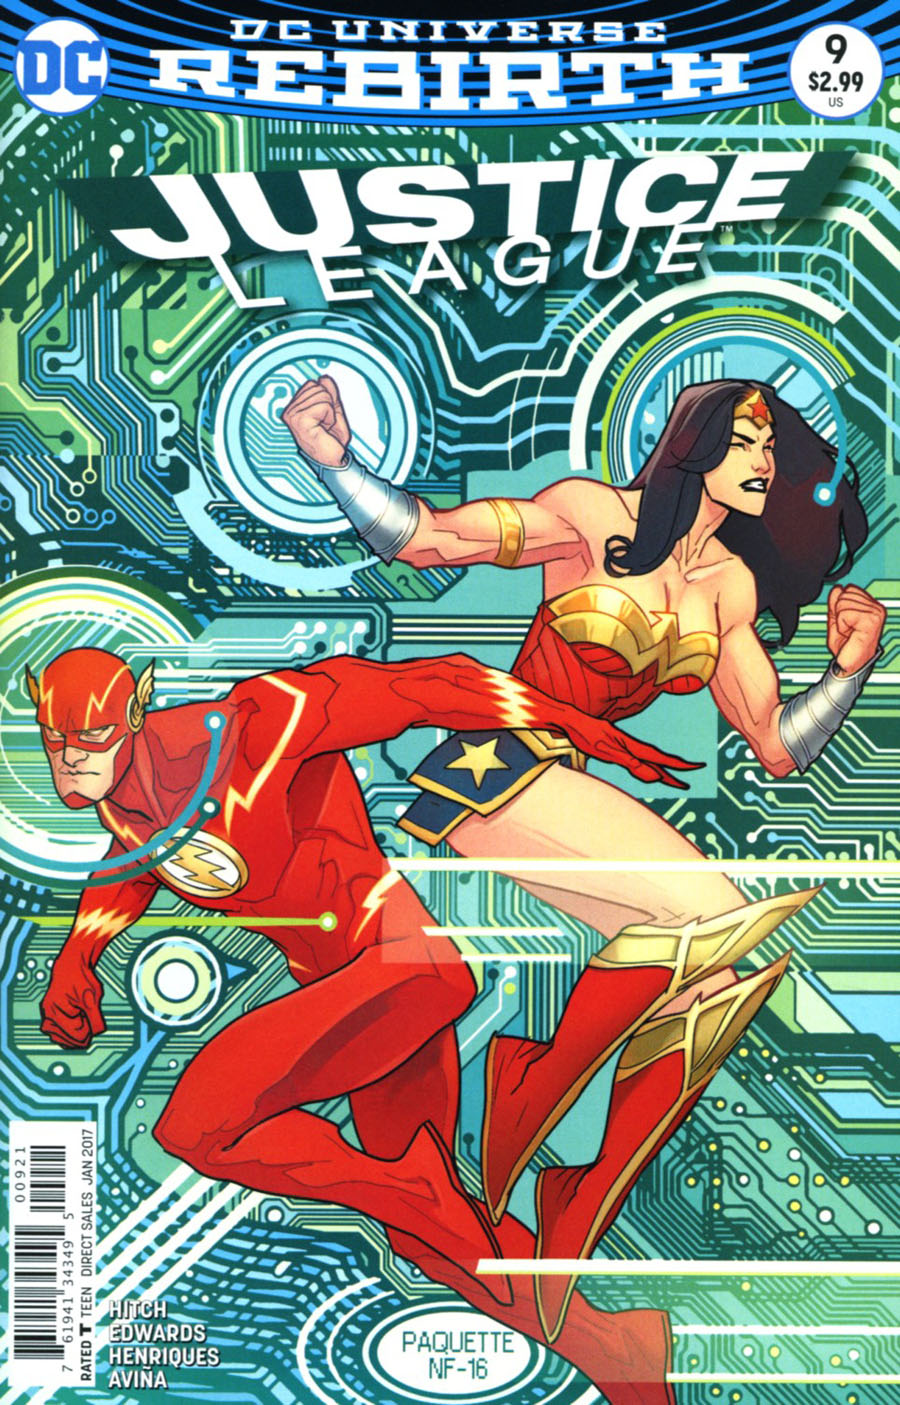 Justice League Vol 3 #9 Cover B Variant Yanick Paquette Cover